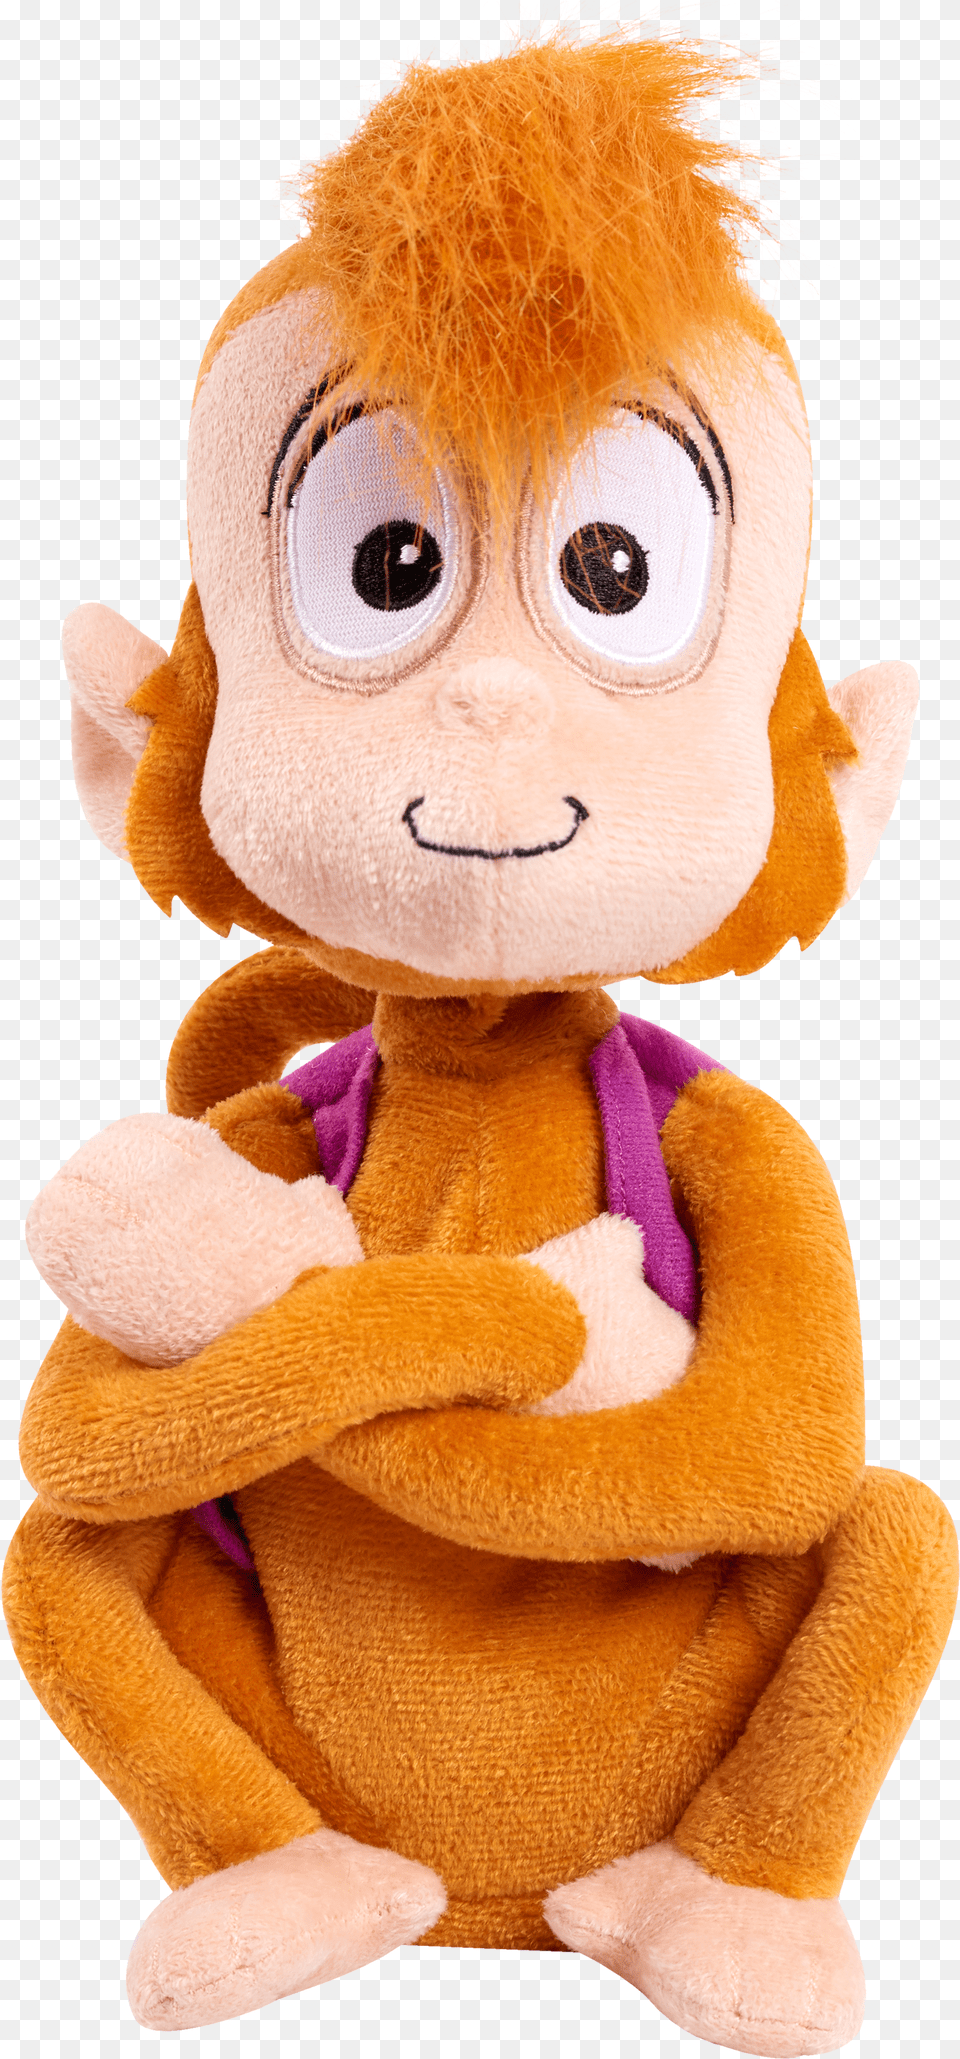 Stuffed Toy Png Image